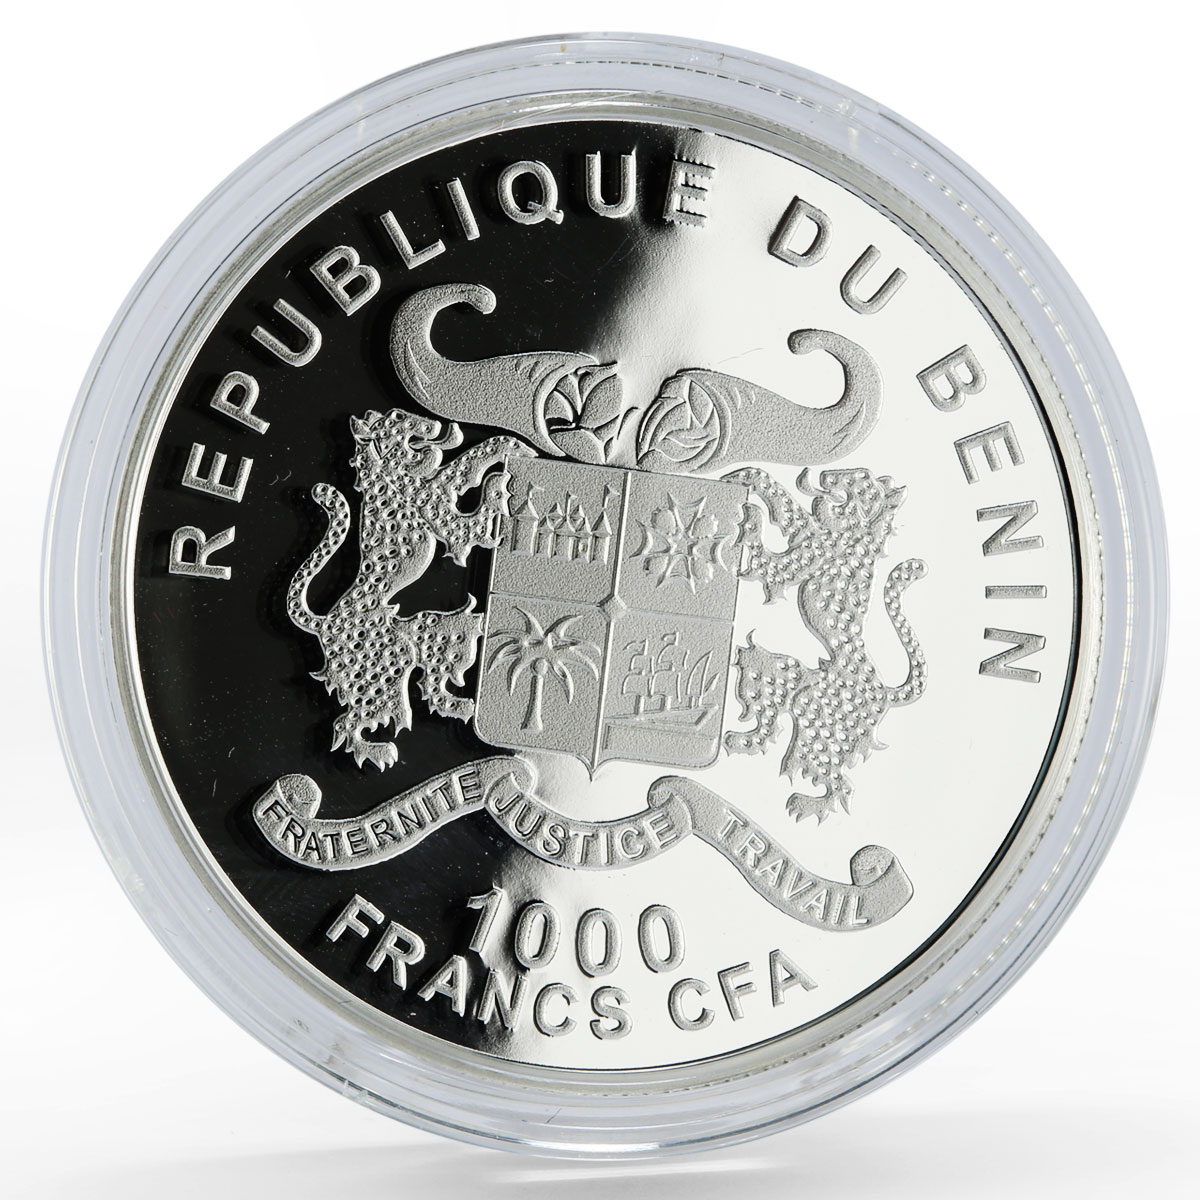 Benin 1000 francs Pomeranian Dog colored proof silver coin 2012